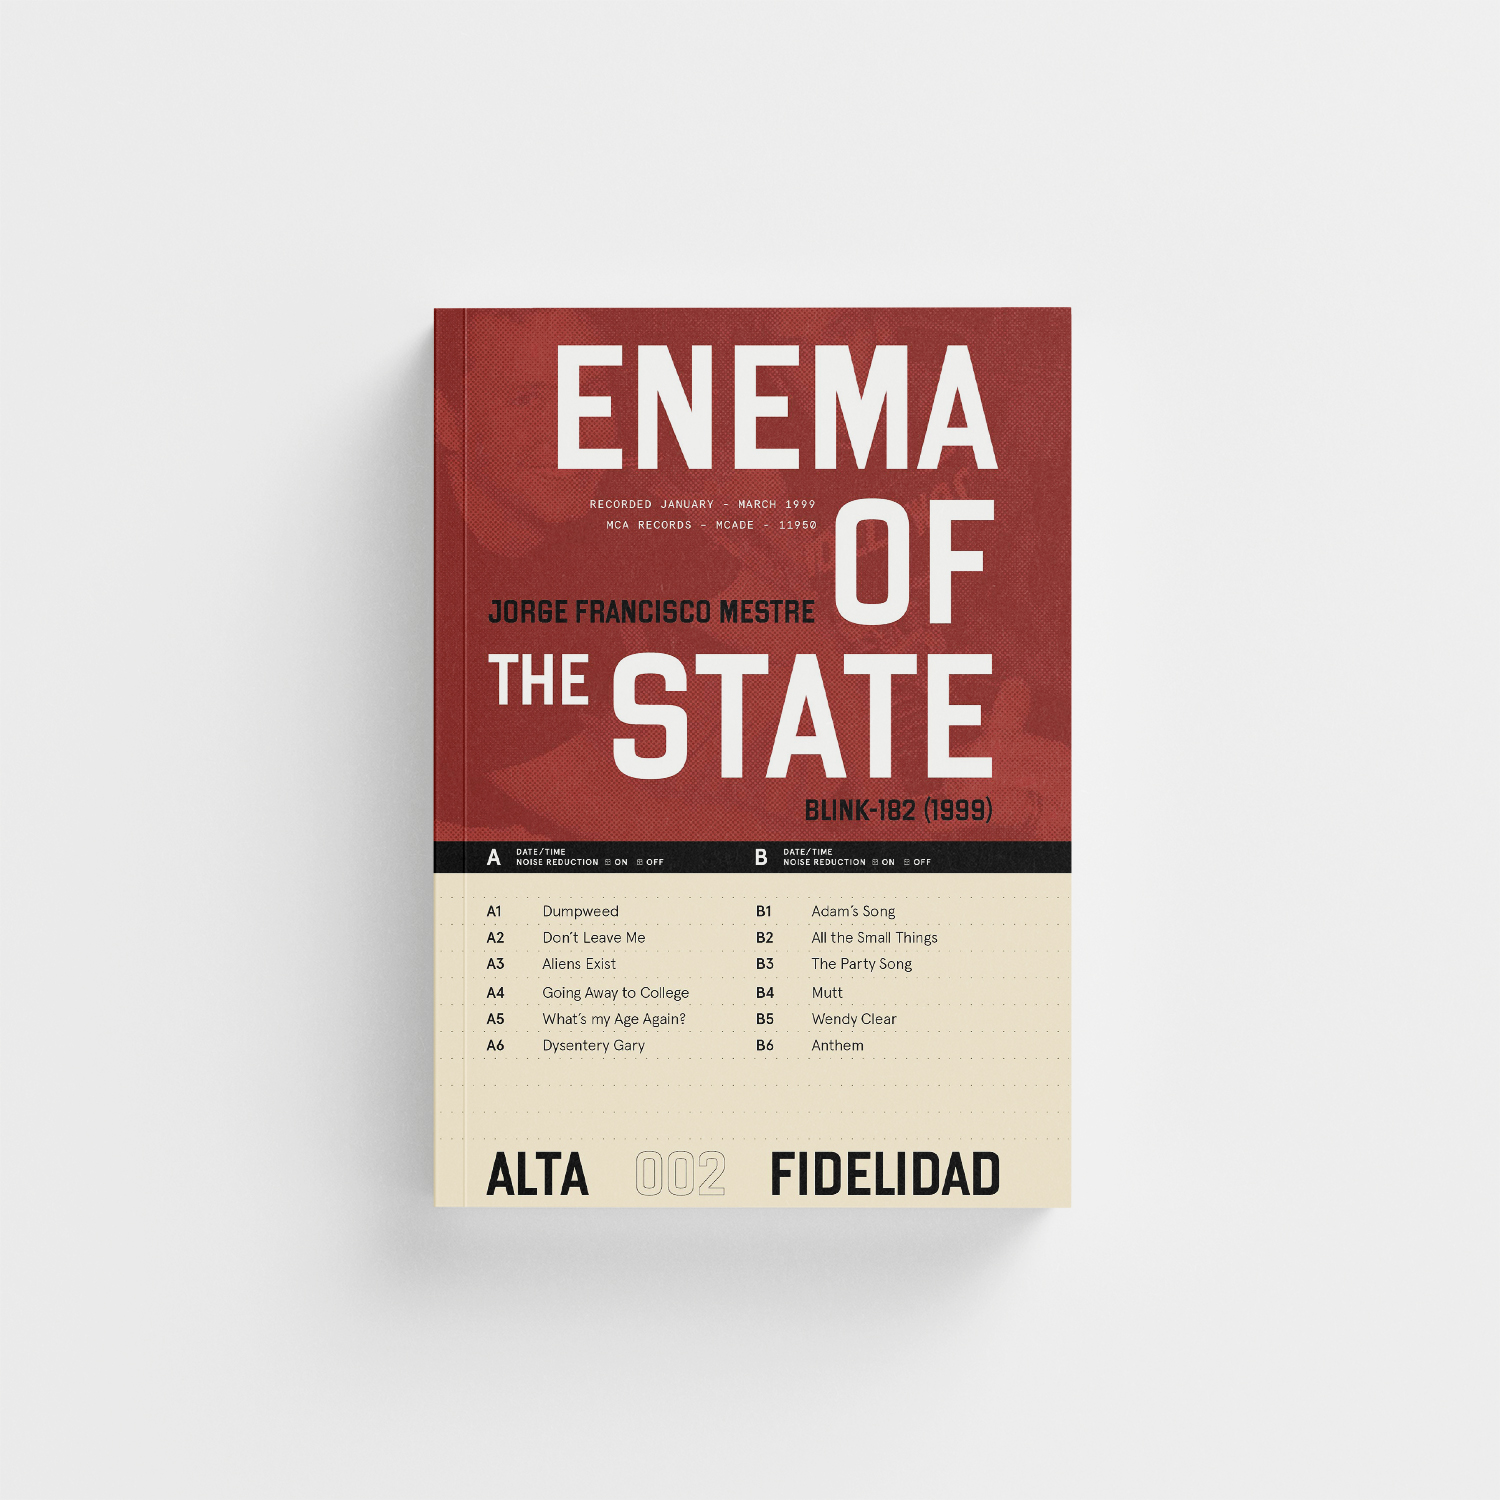 Enema of the State